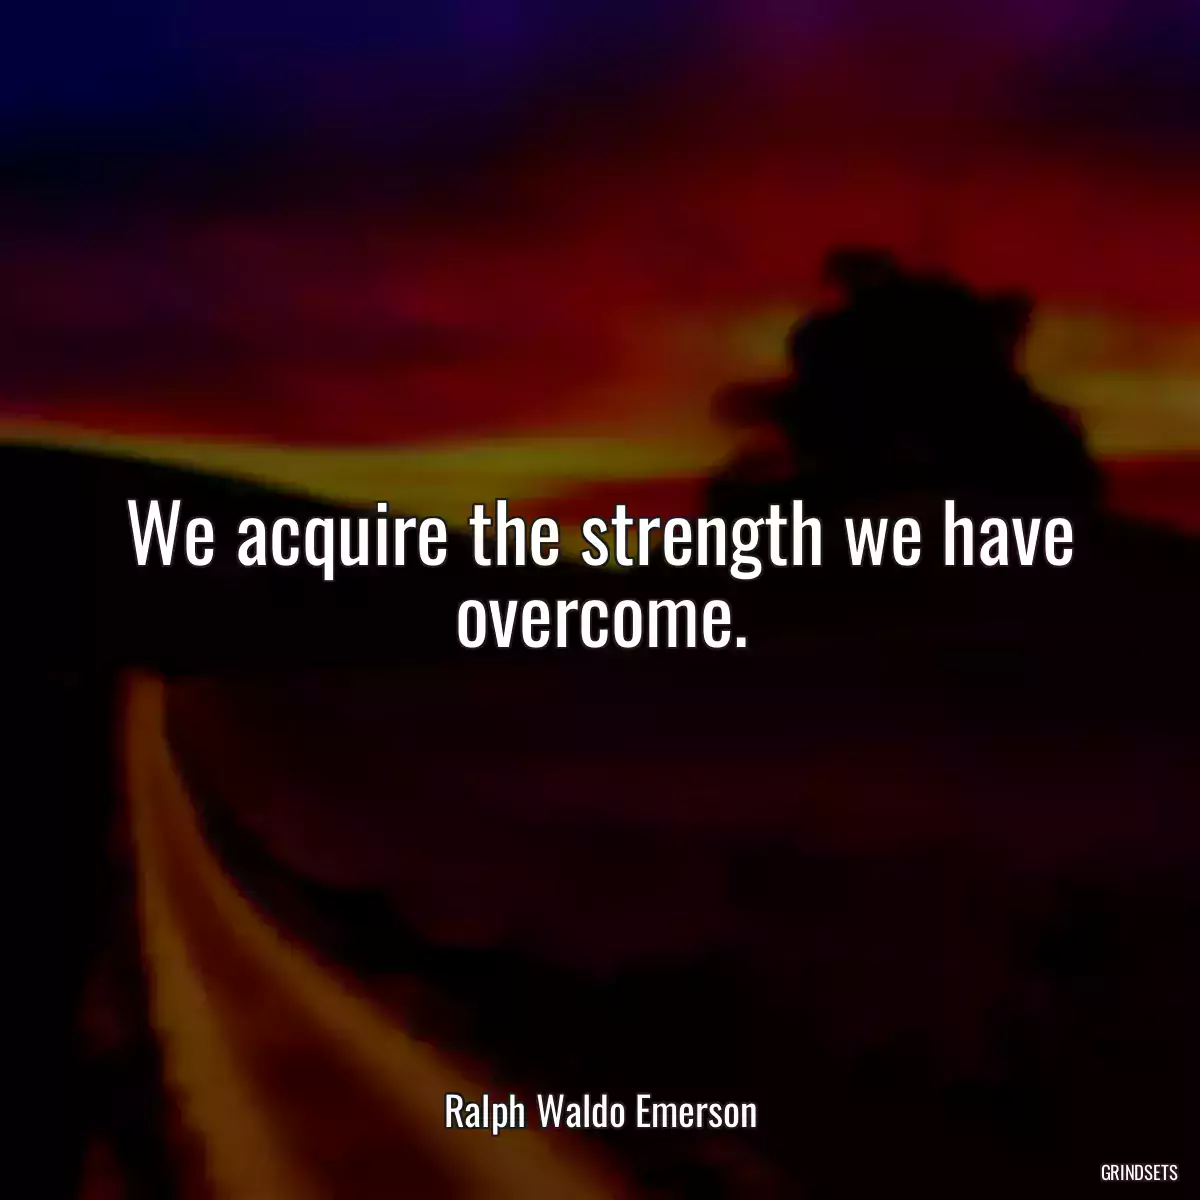 We acquire the strength we have overcome.